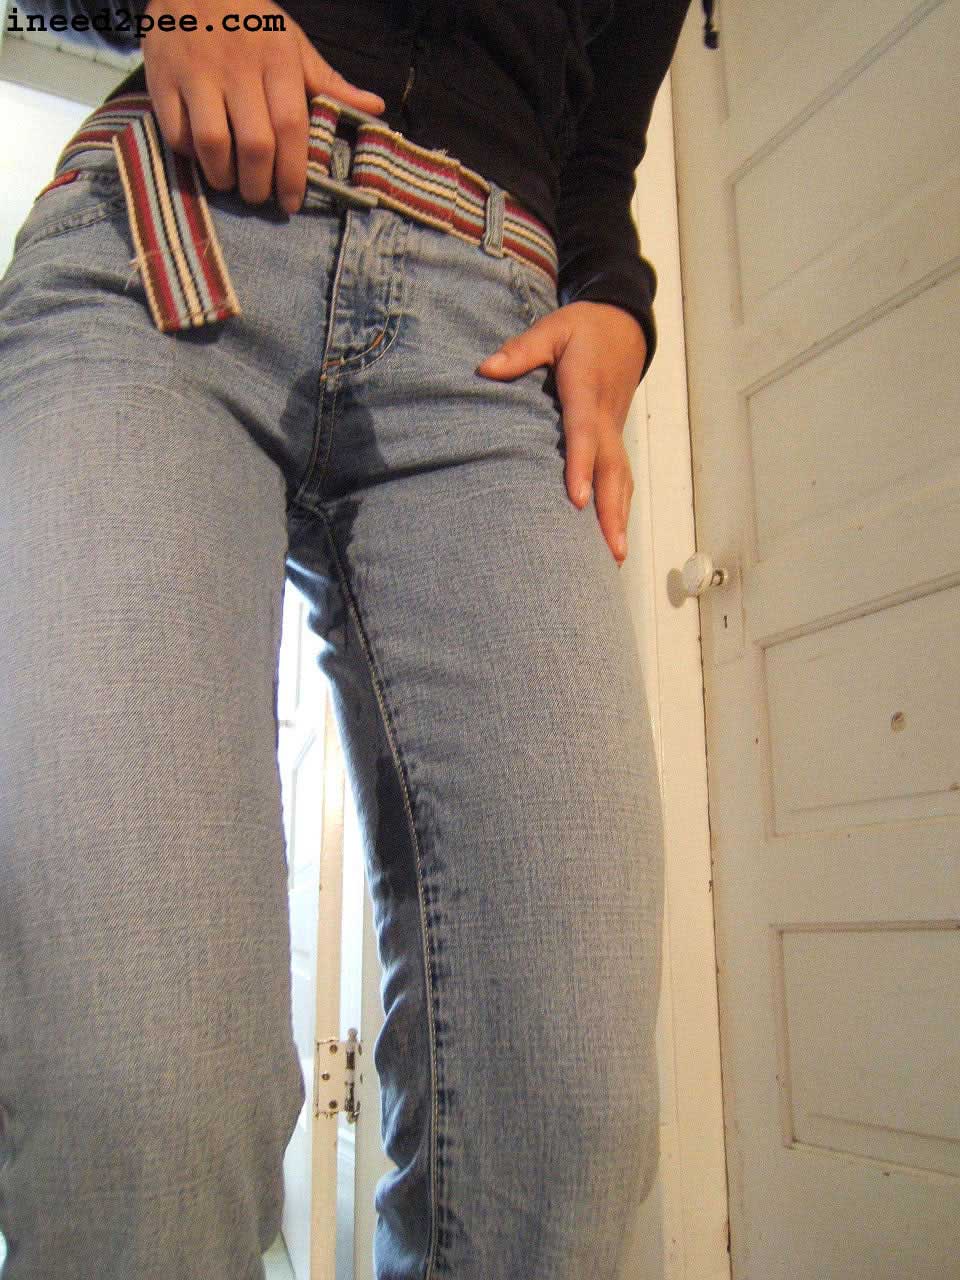 Ineed2pee Pissing In Her Jeans.